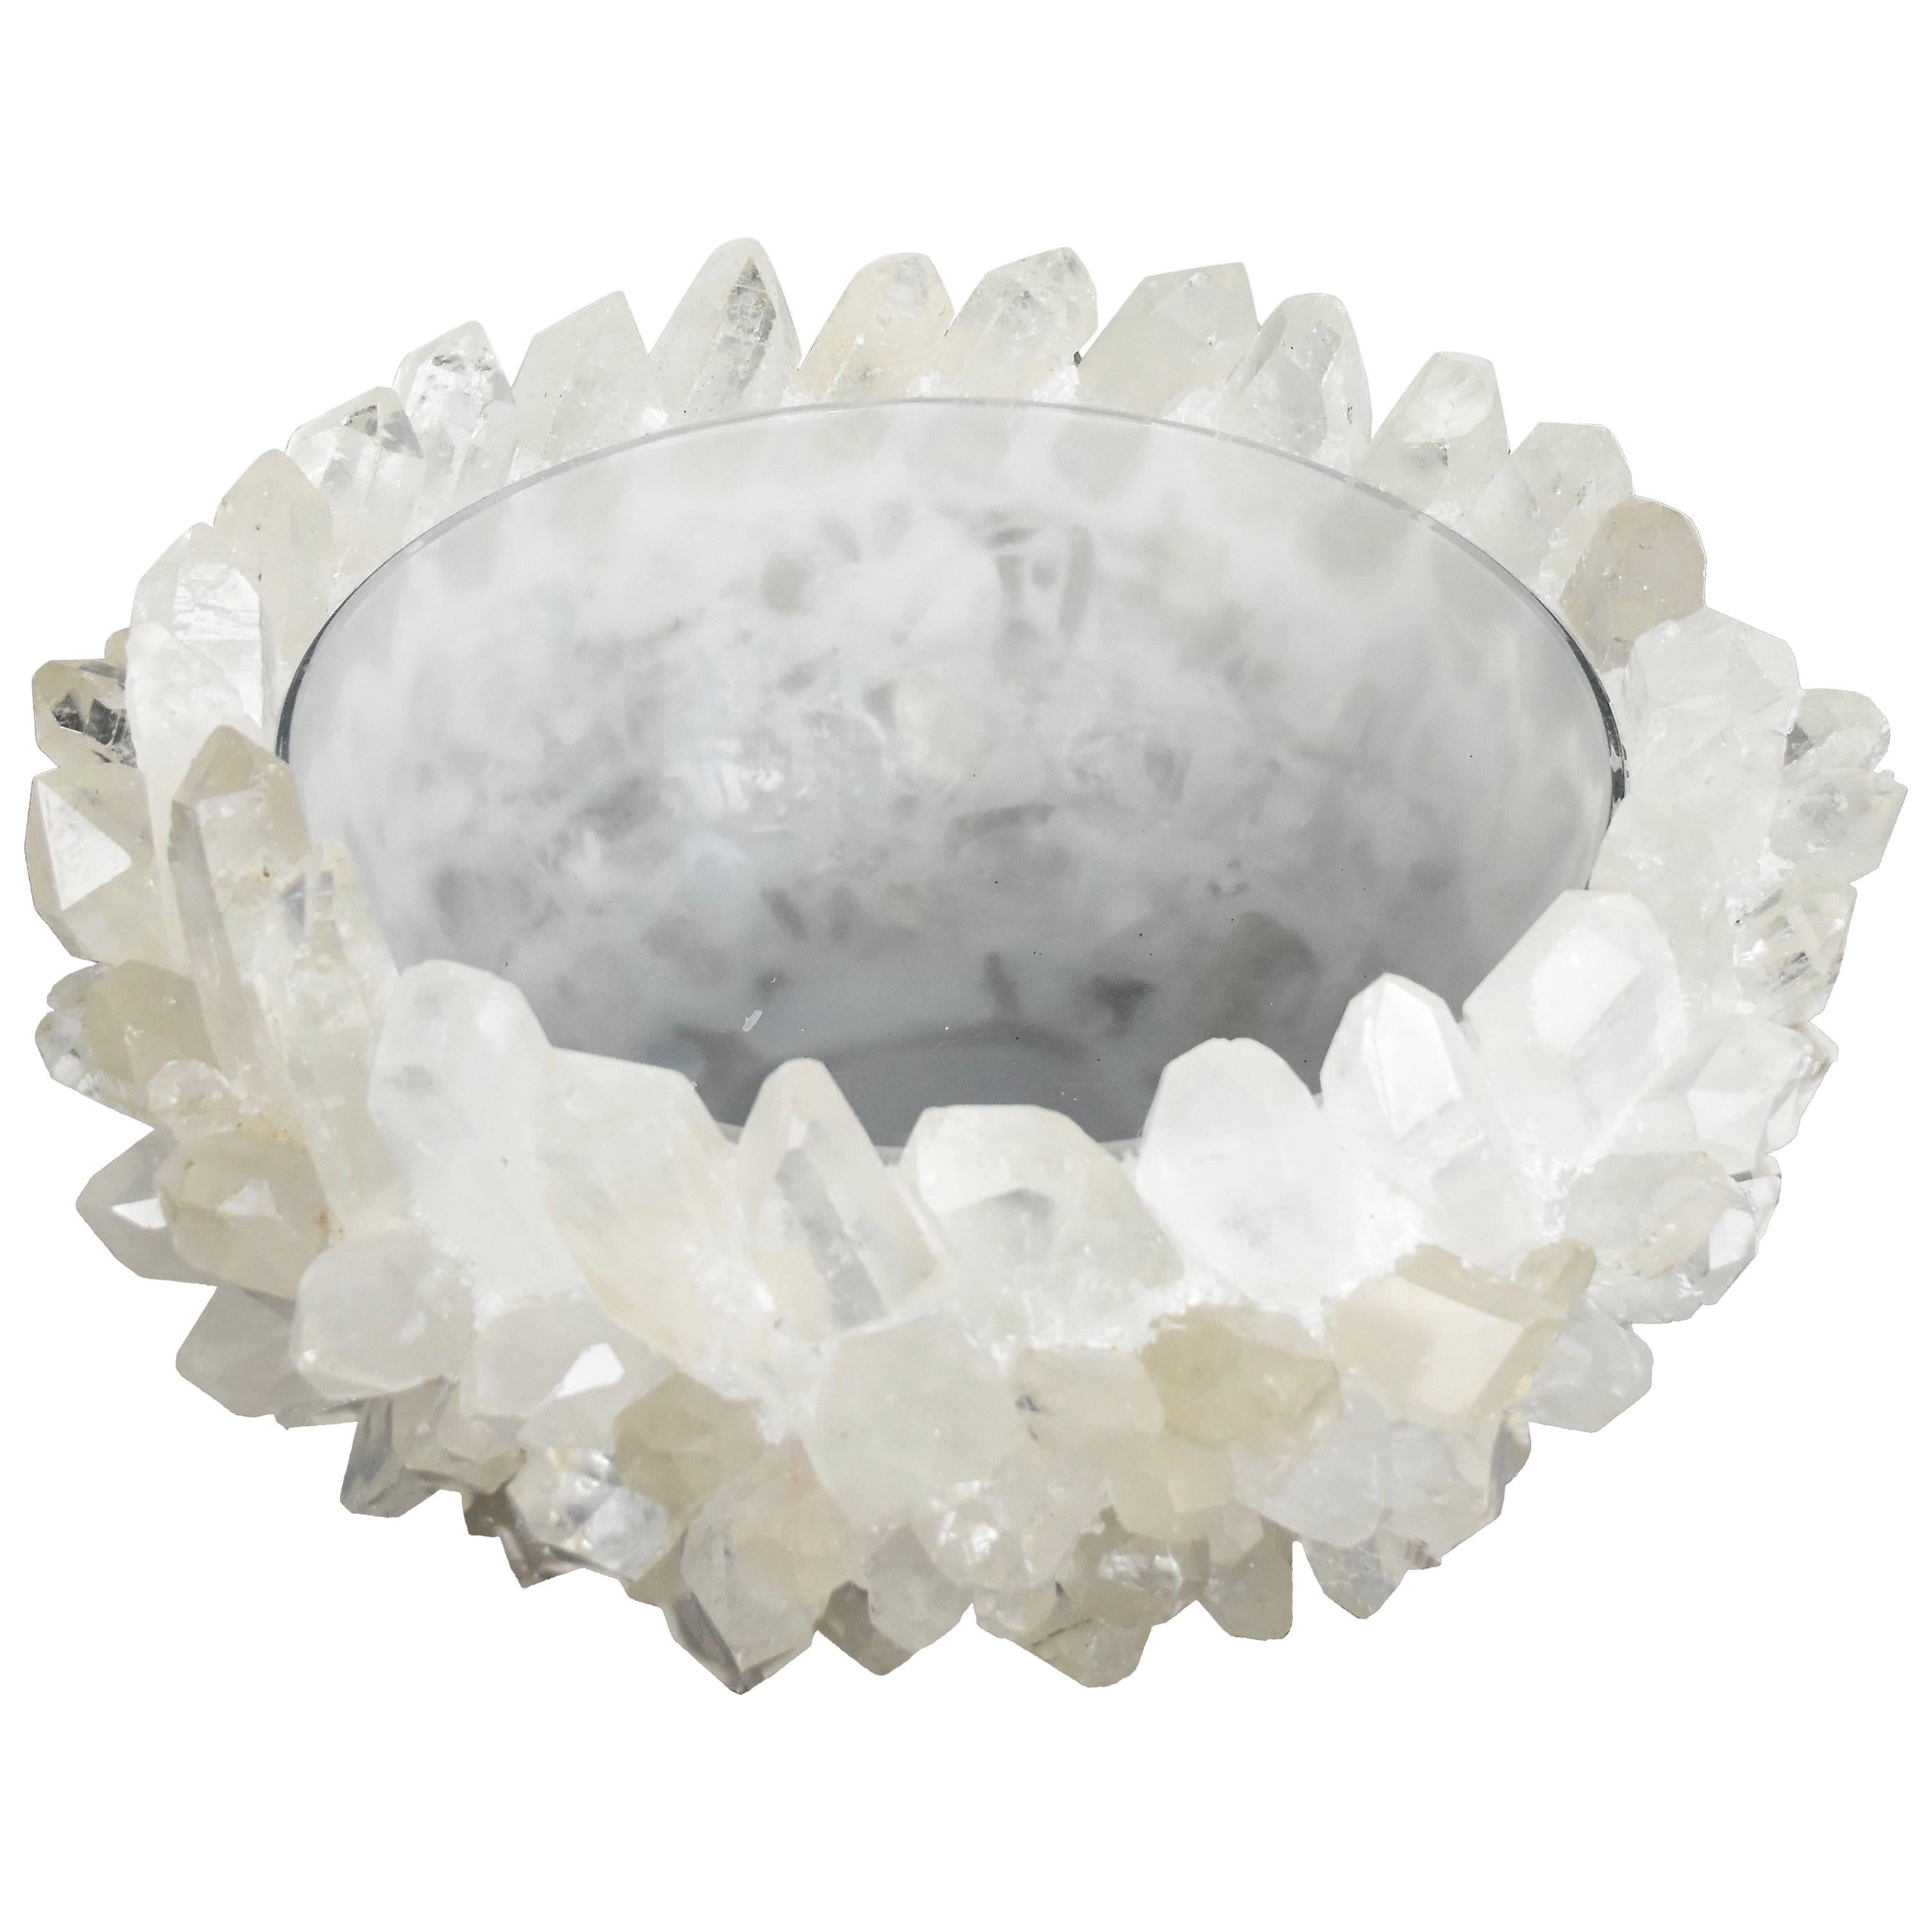 Large Quartz Crystal Frosted Glass Bowl